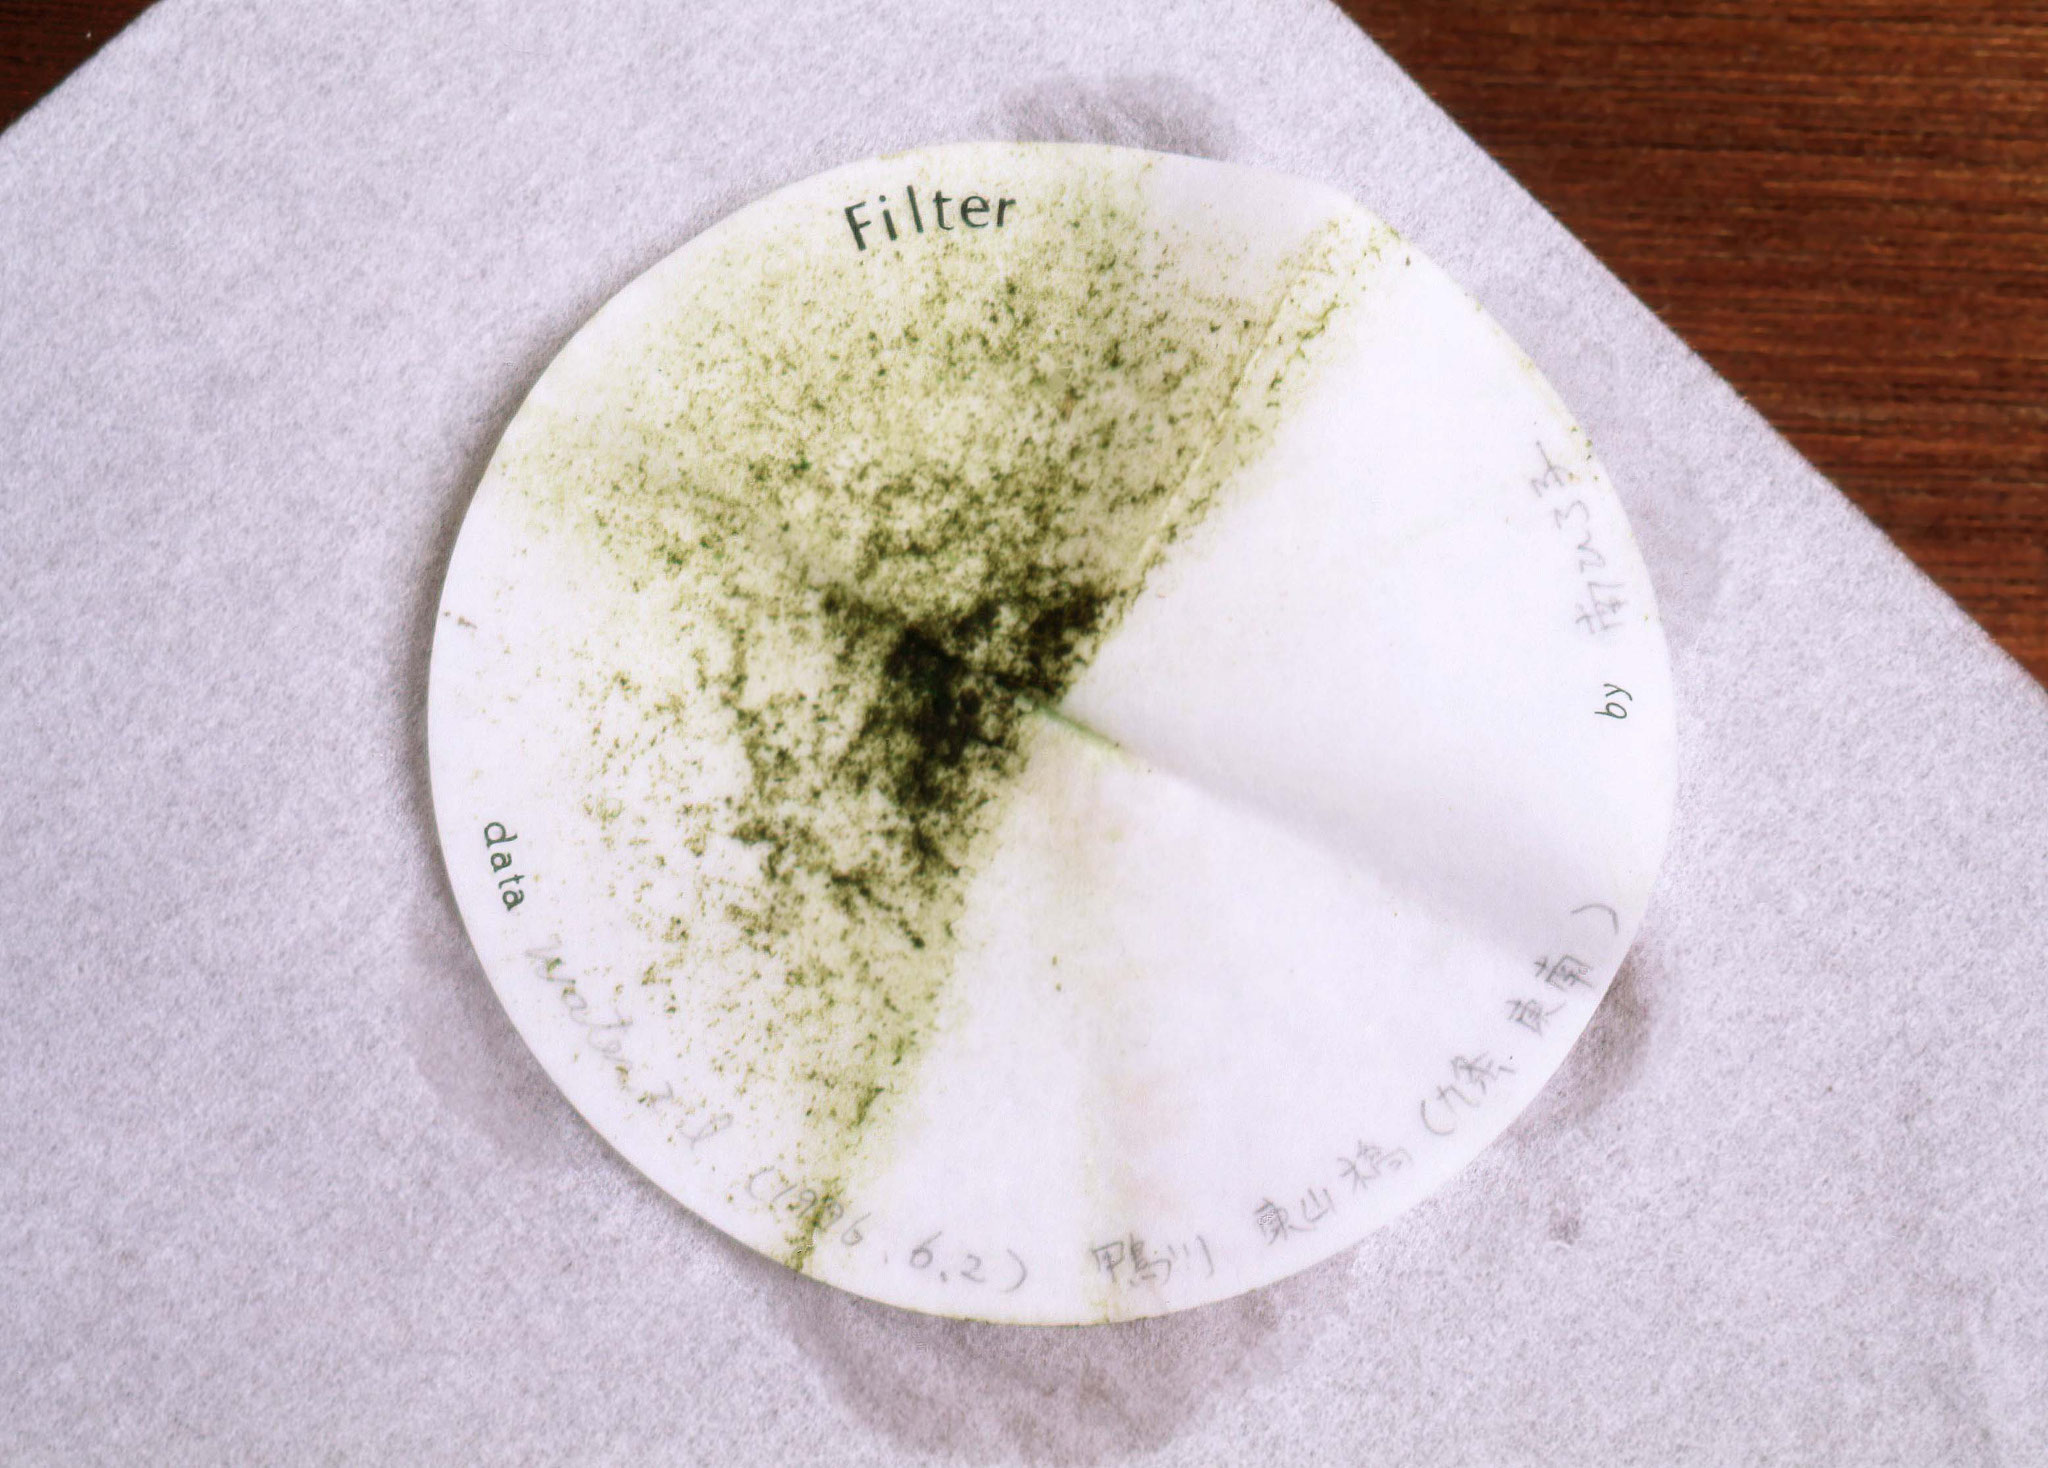 take out filter paper